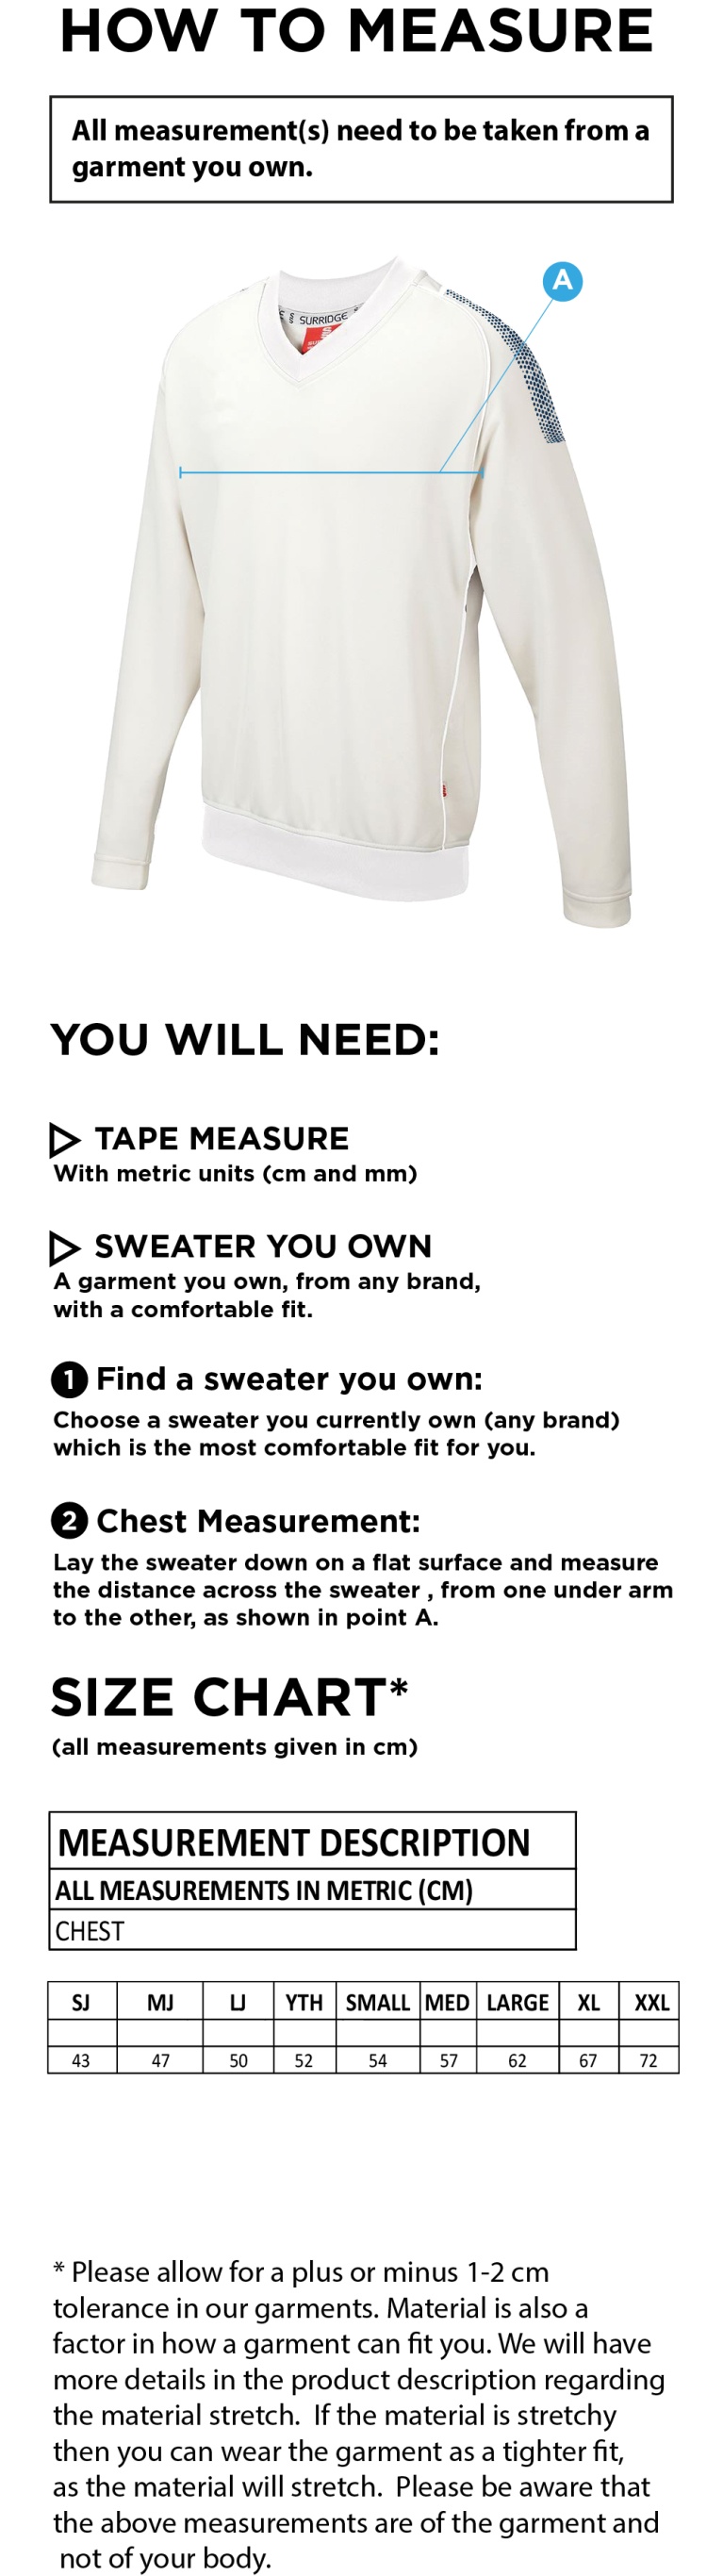 Chirpy's Chiefs - Long Sleeve Sweater - Size Guide